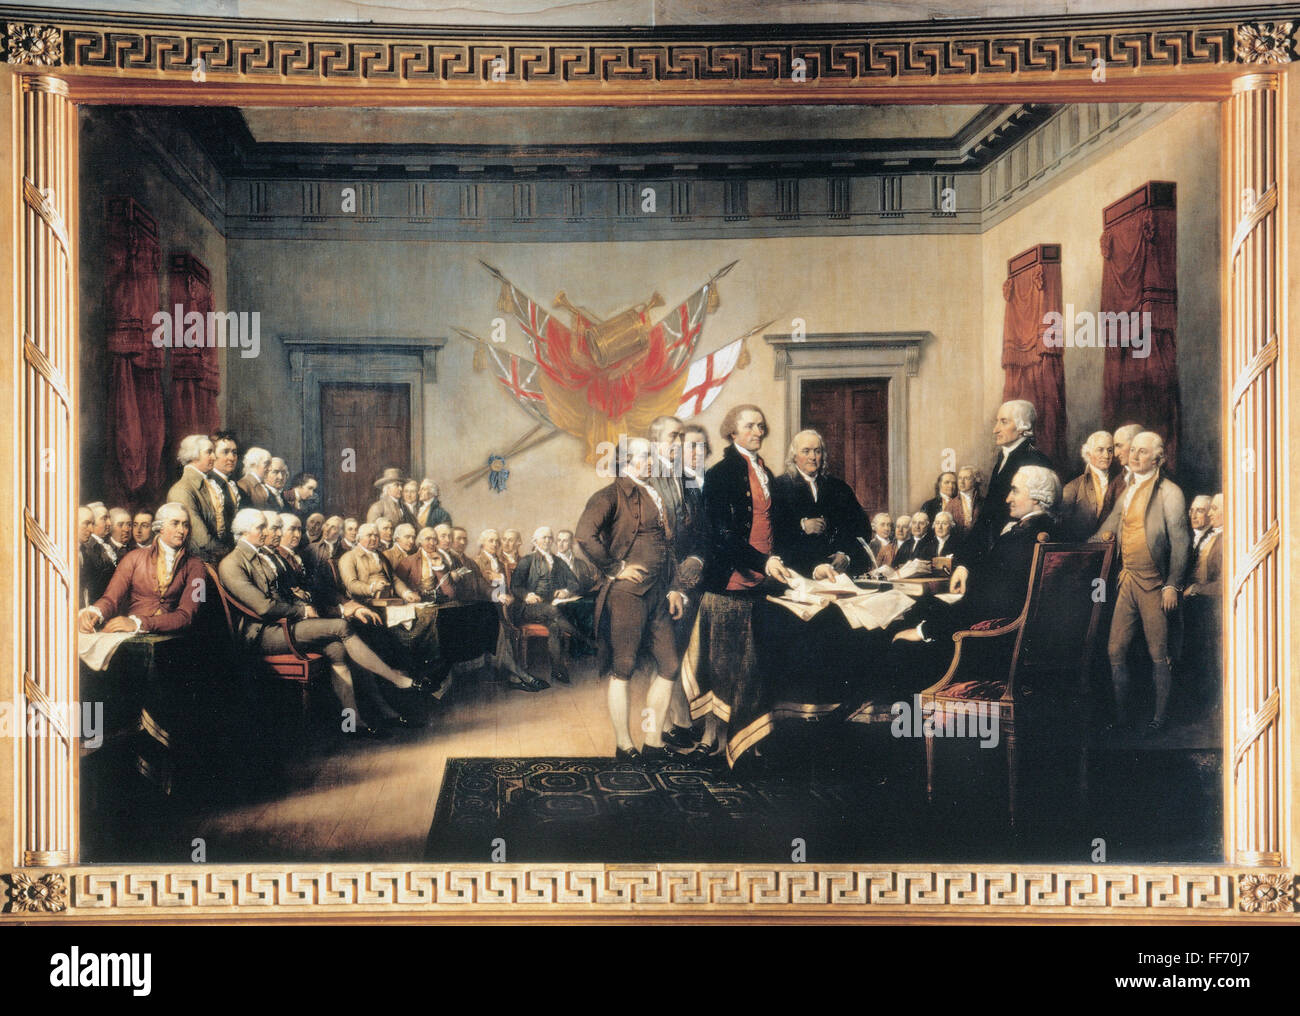 1776 8 x 10 Photo ph5 History July 4 Signing Declaration of Independence U.S 